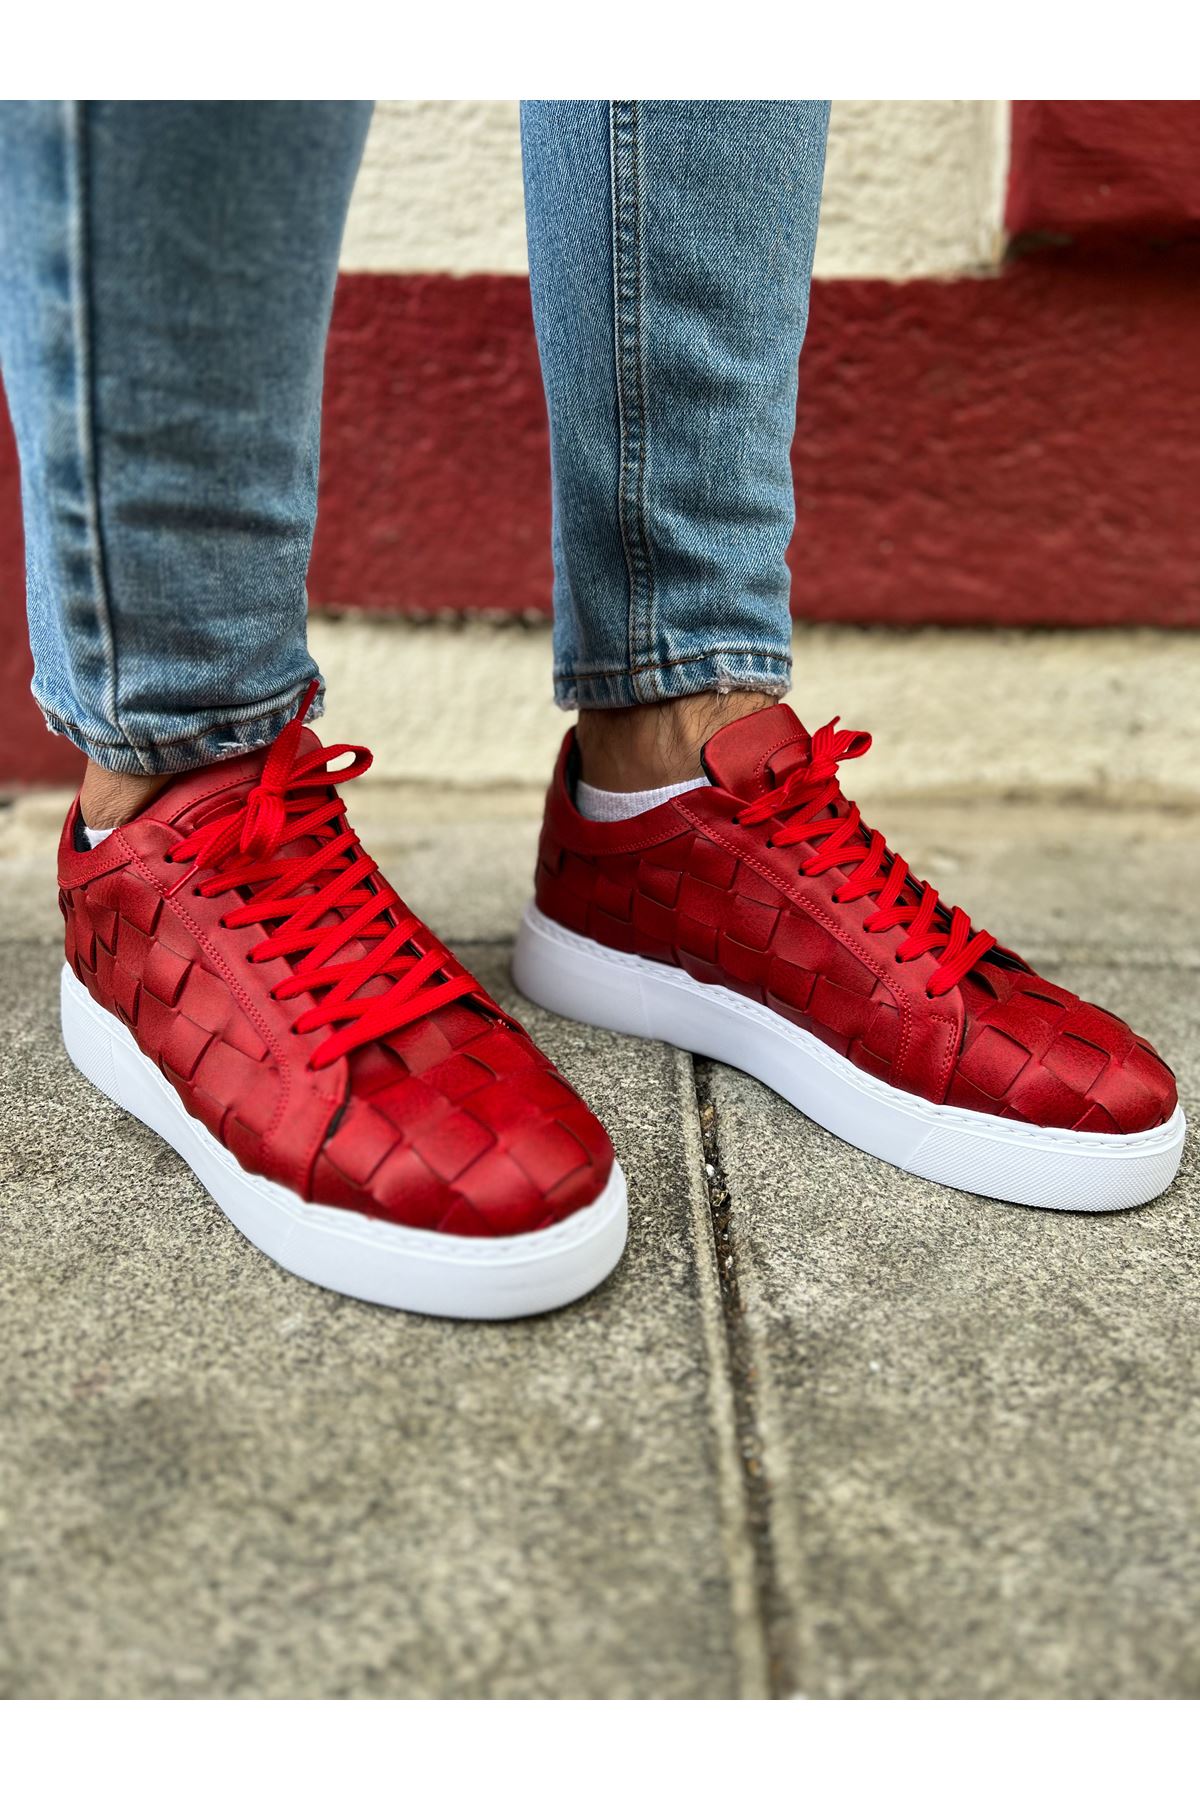 CH209 OBT Vimini Men's Shoes sneakers RED - STREETMODE™